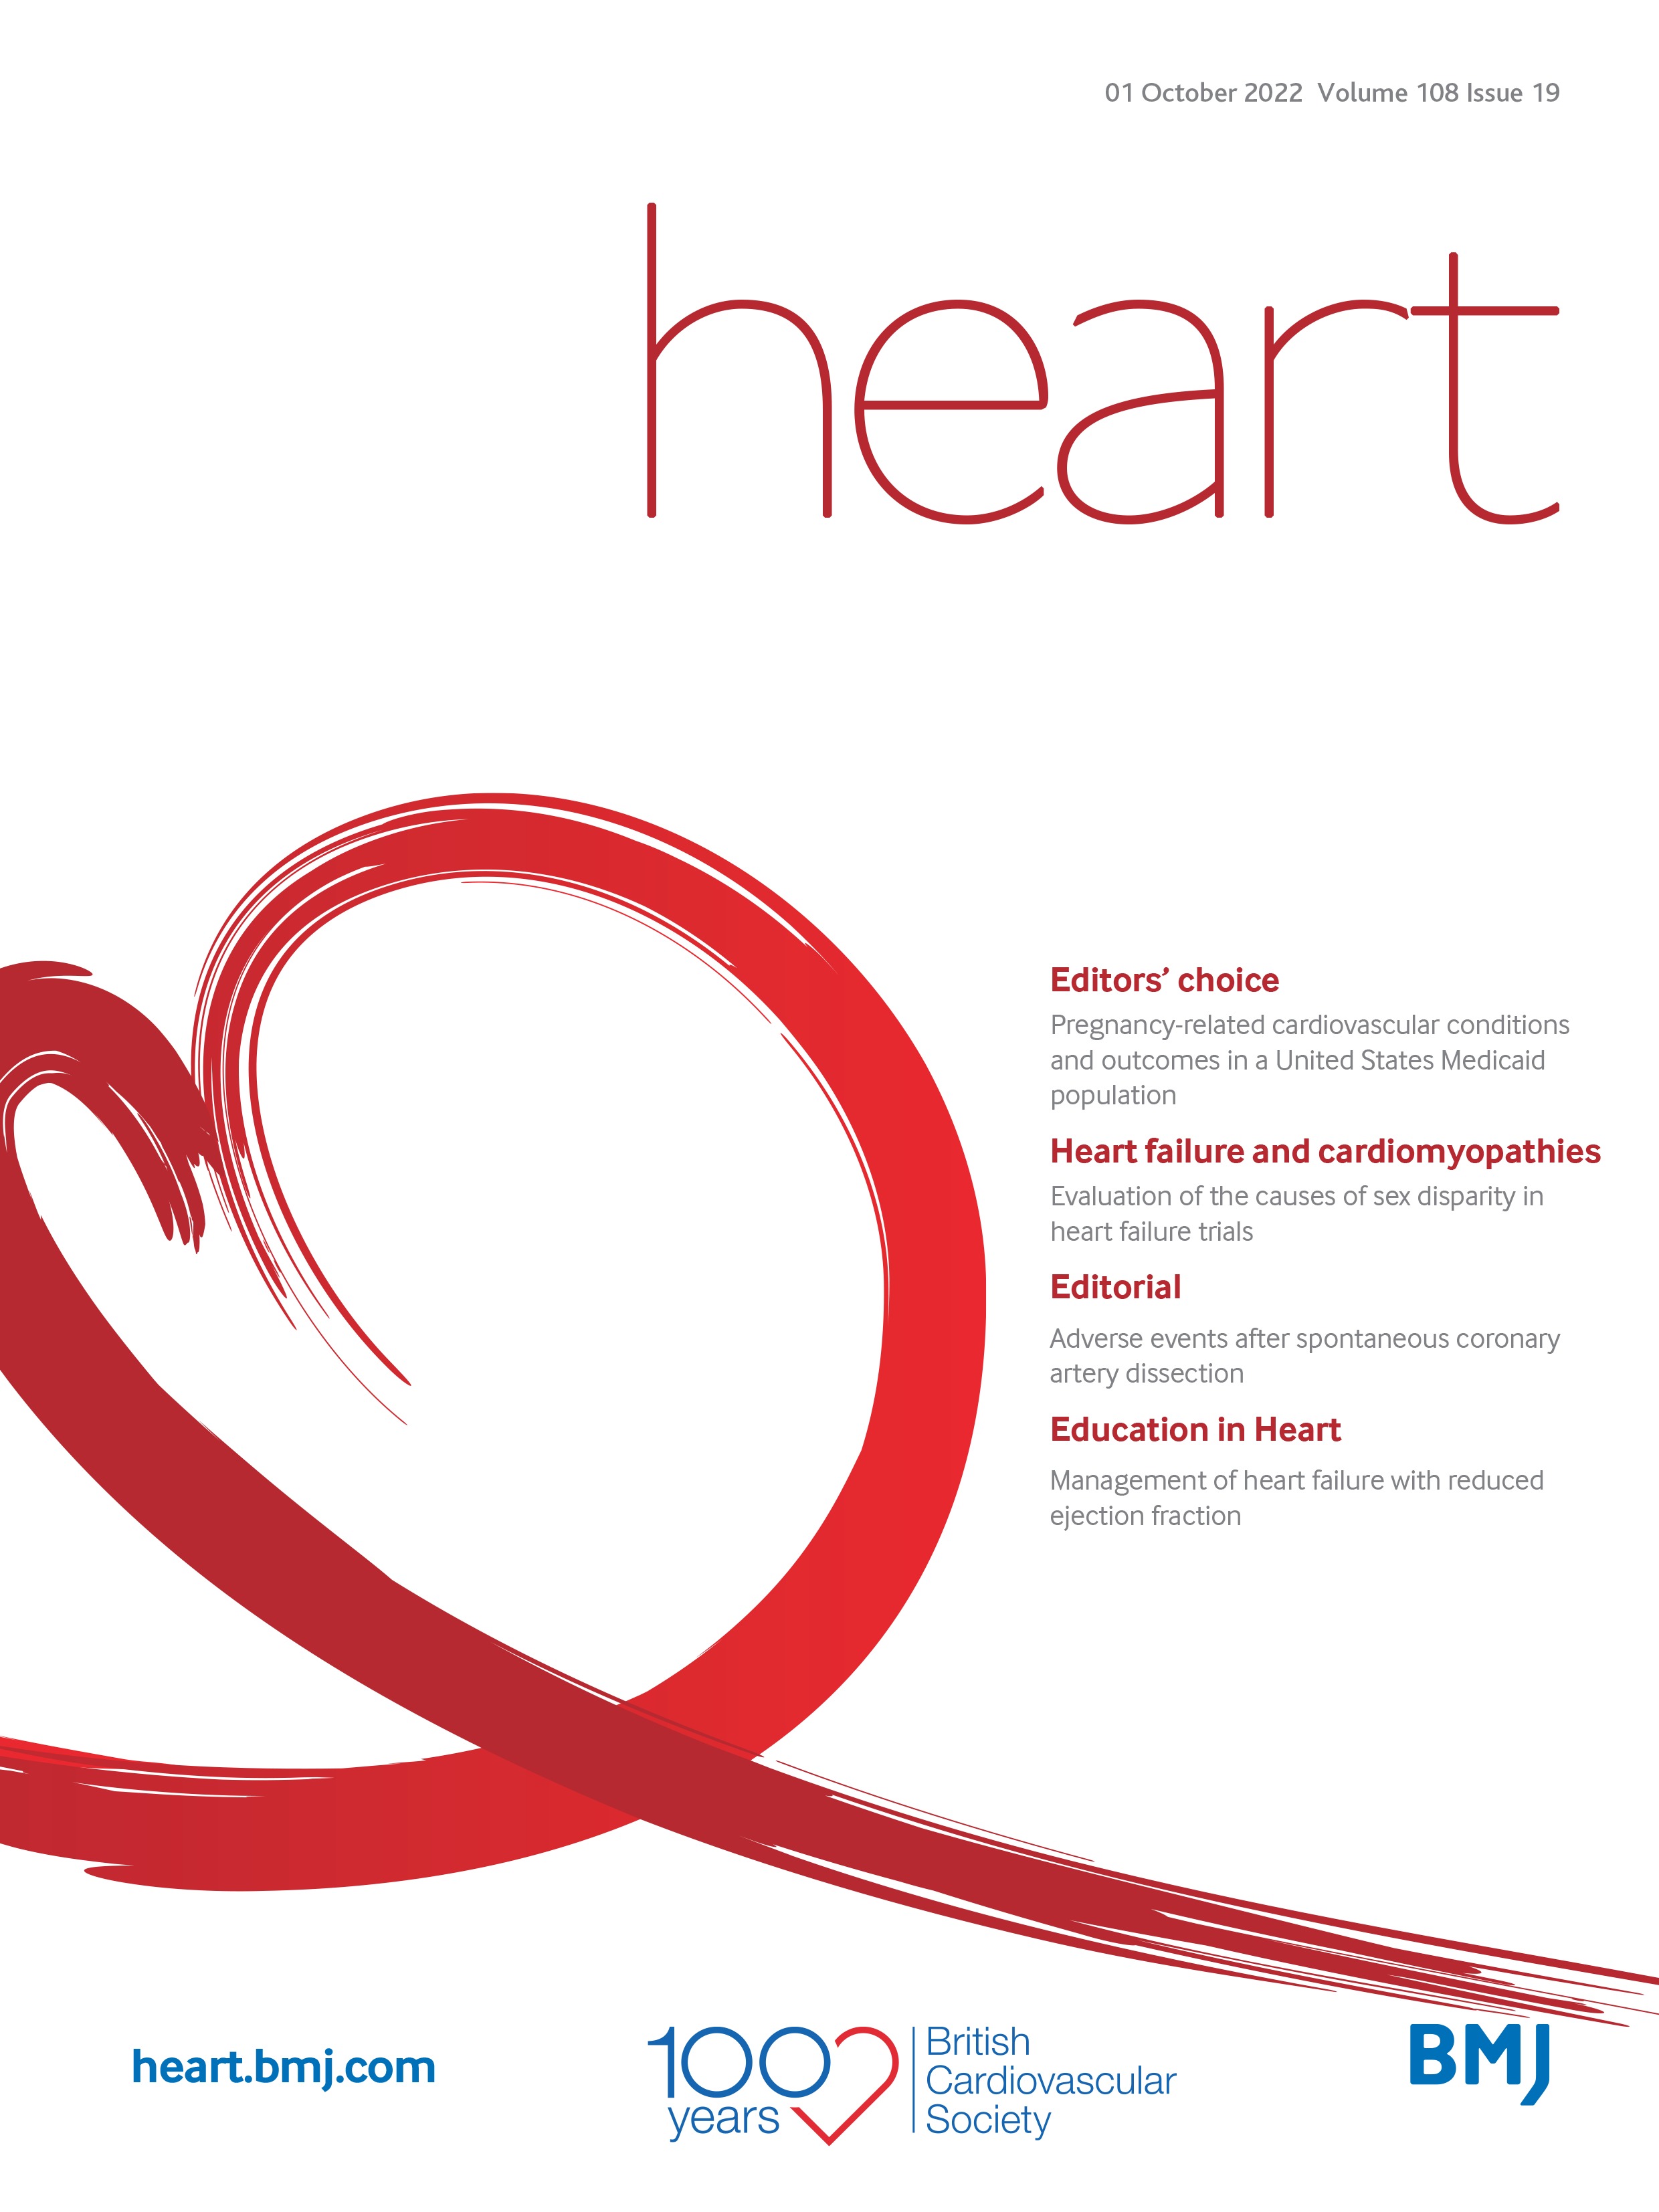 Clinical outcomes in spontaneous coronary artery dissection